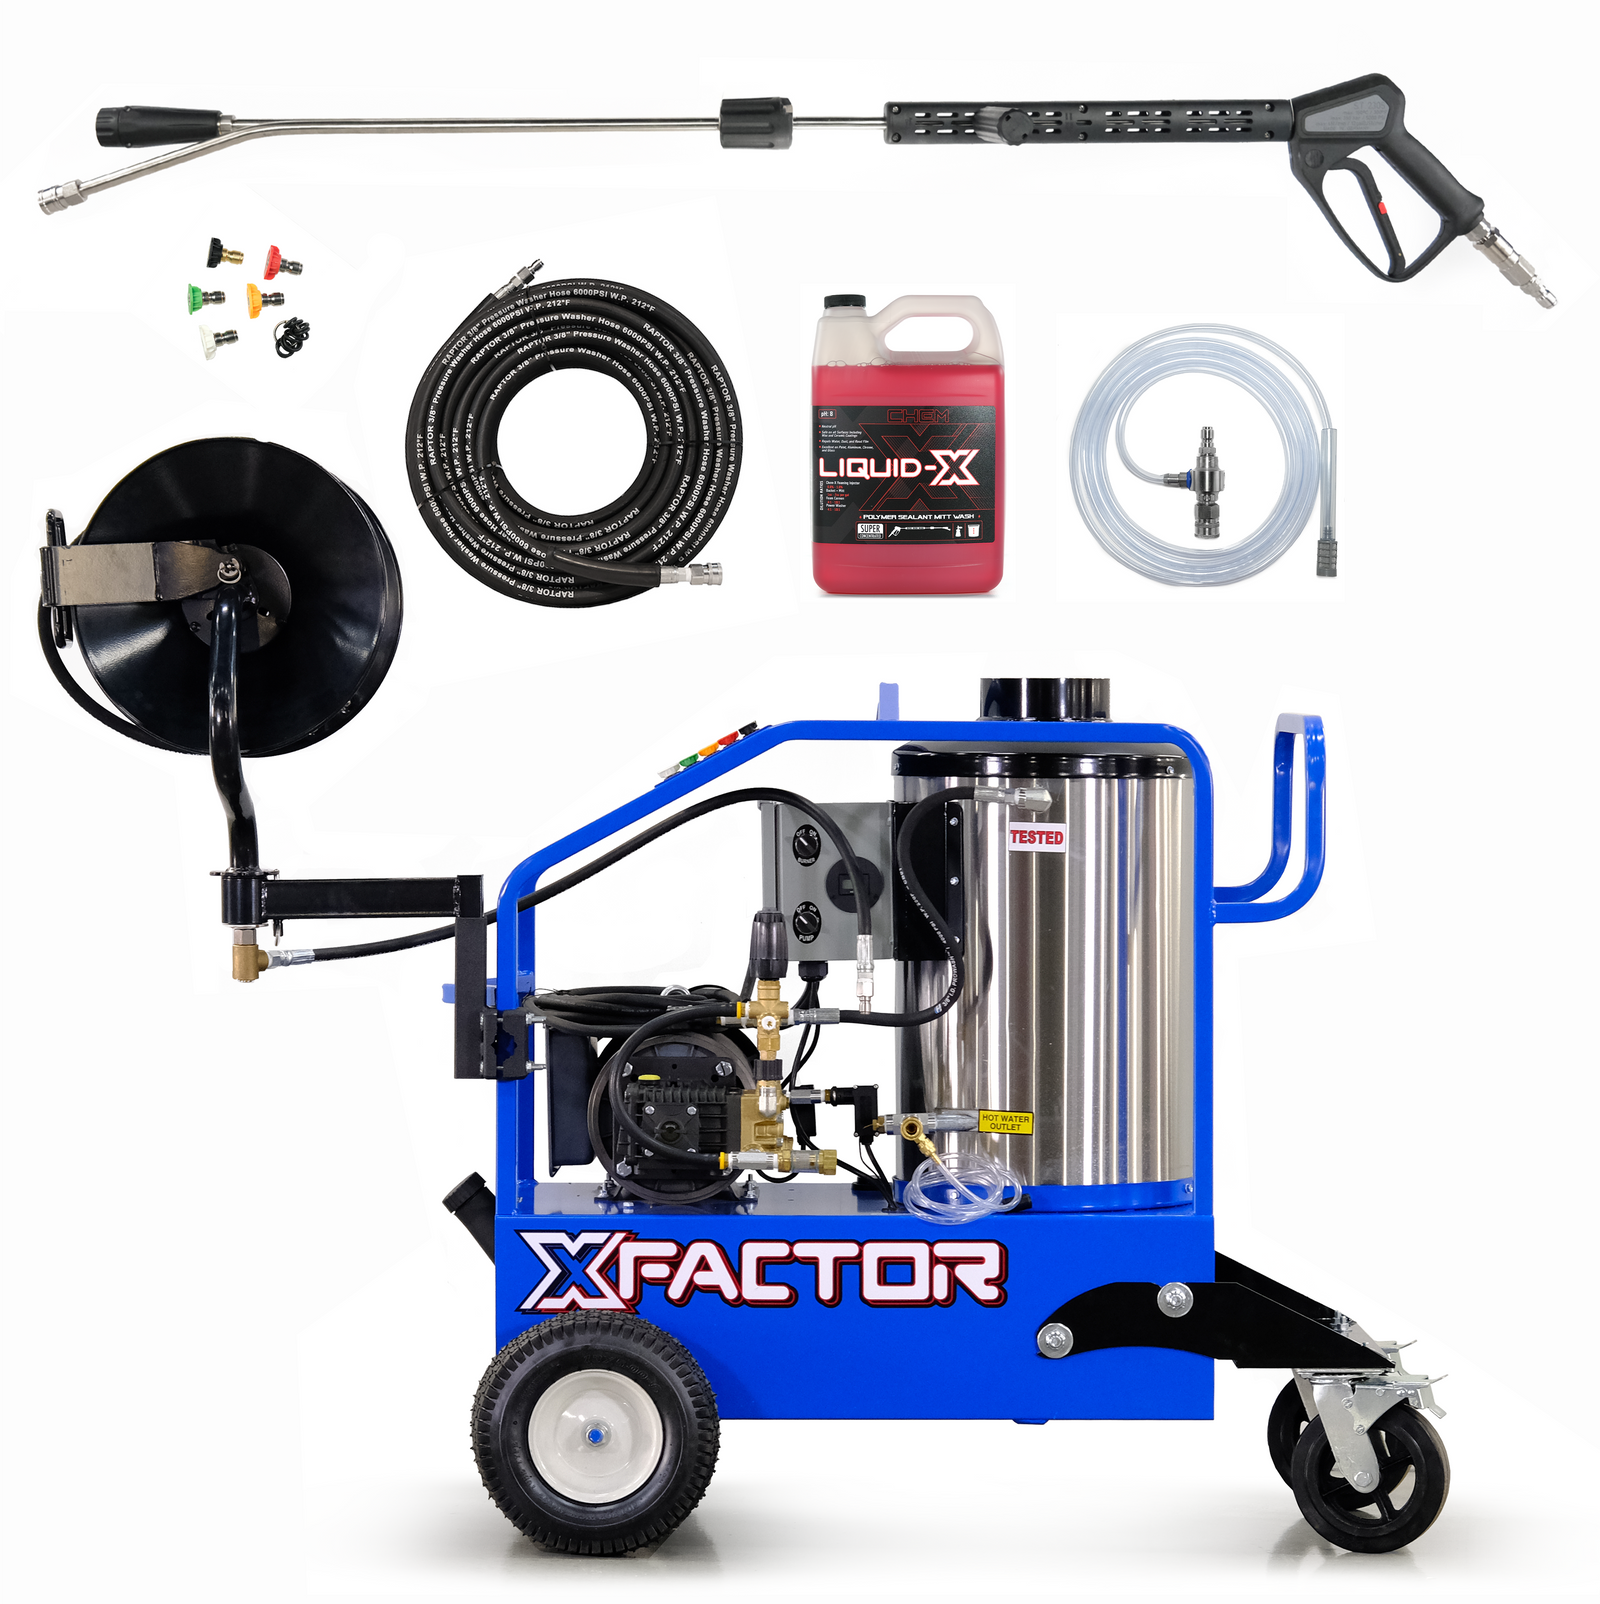 X Factor Complete Wash Bay System: Hot Water Portable 220v Electric - Big Easy Foaming Kit - Chem-X